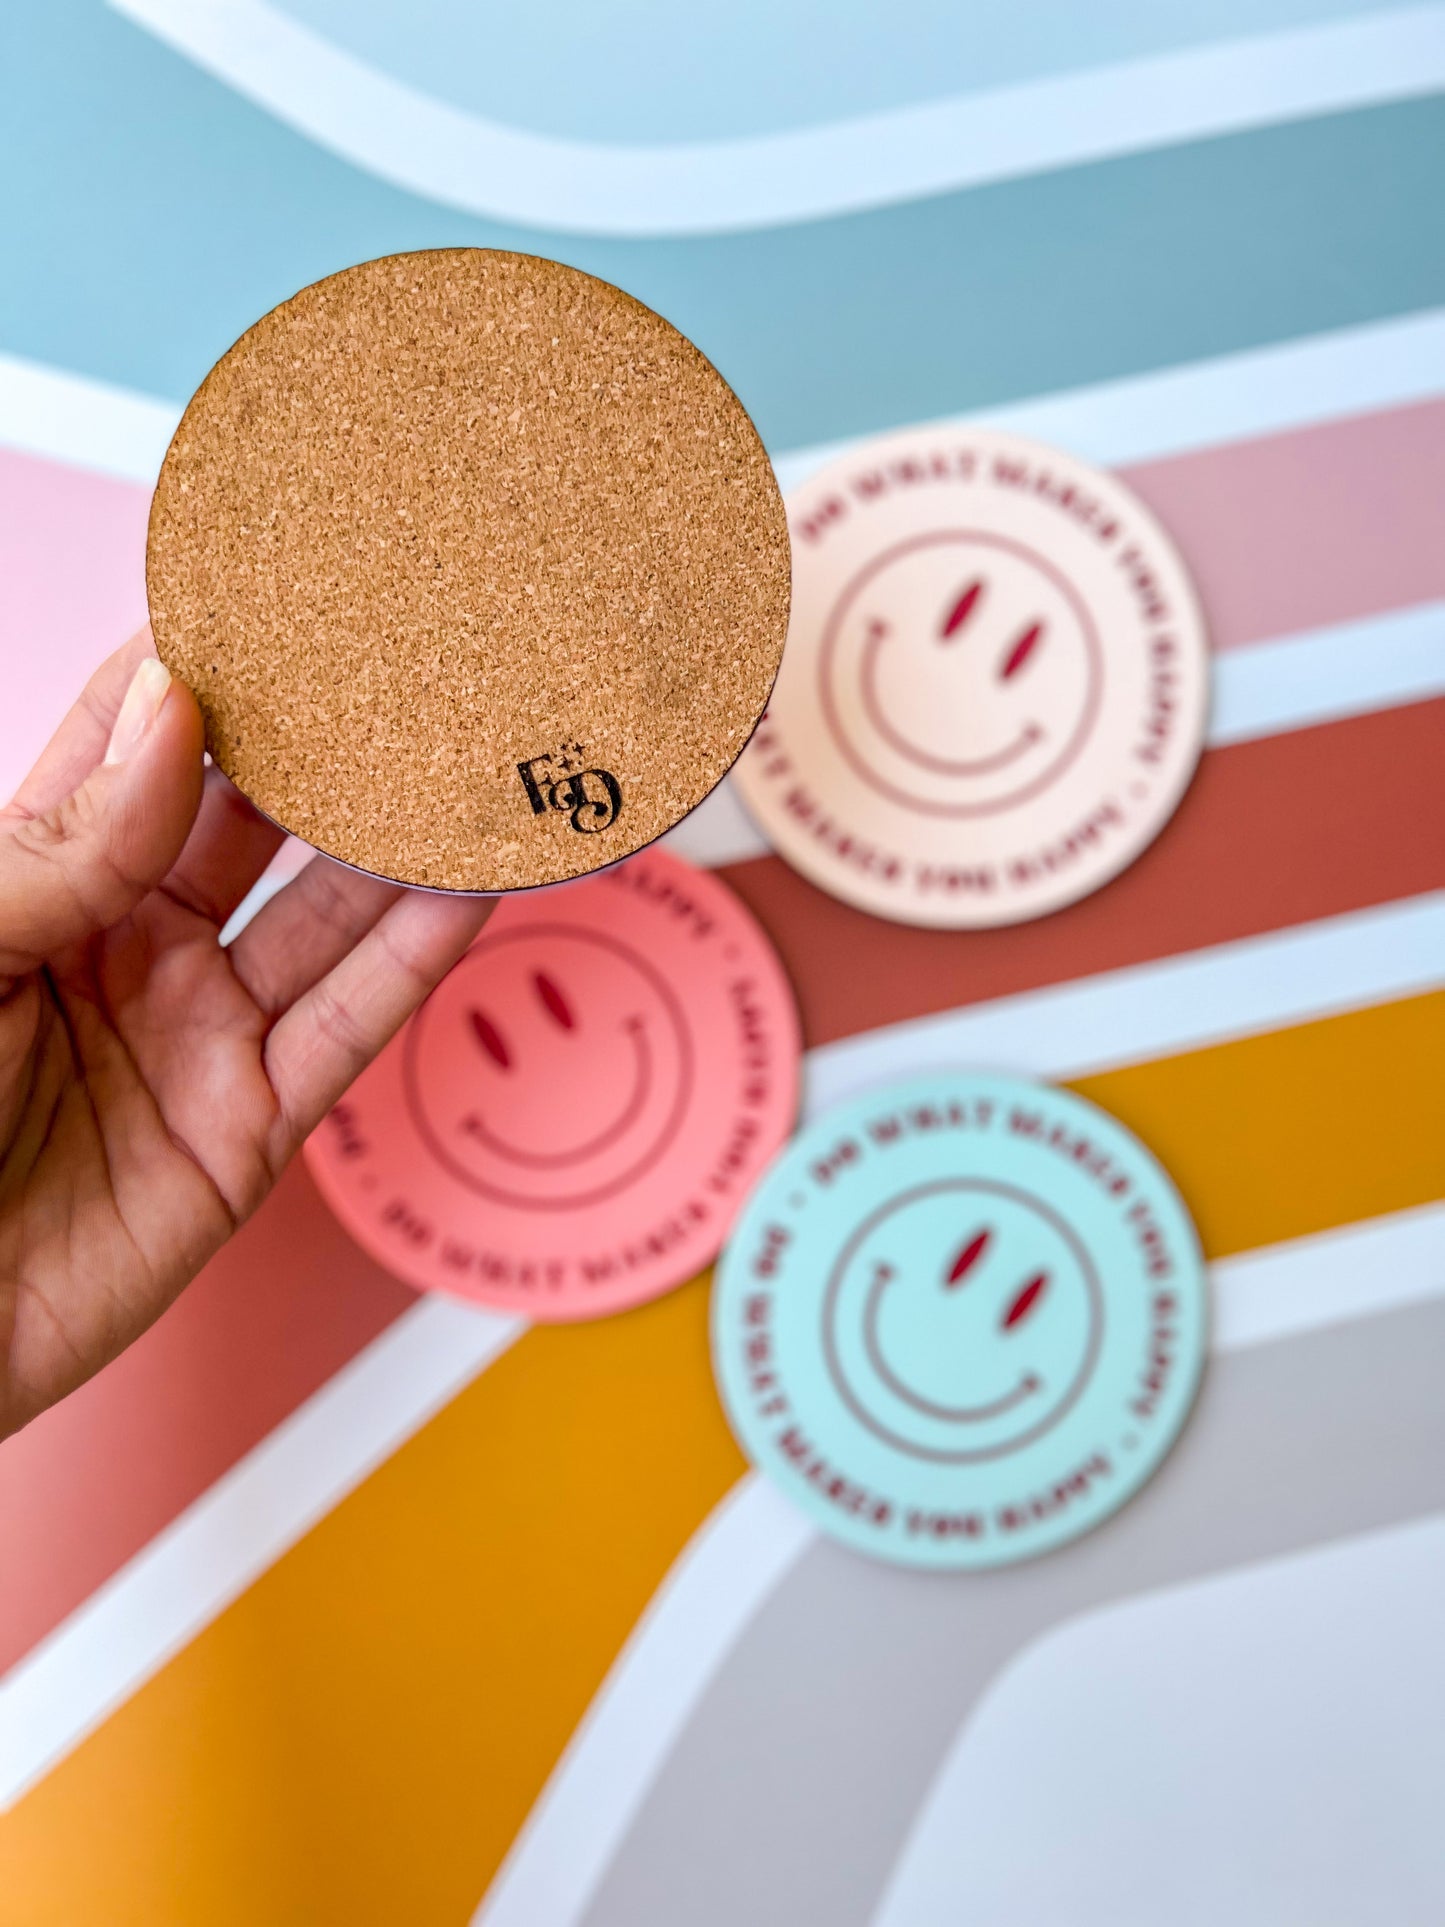 Do What Makes You Happy | Coaster